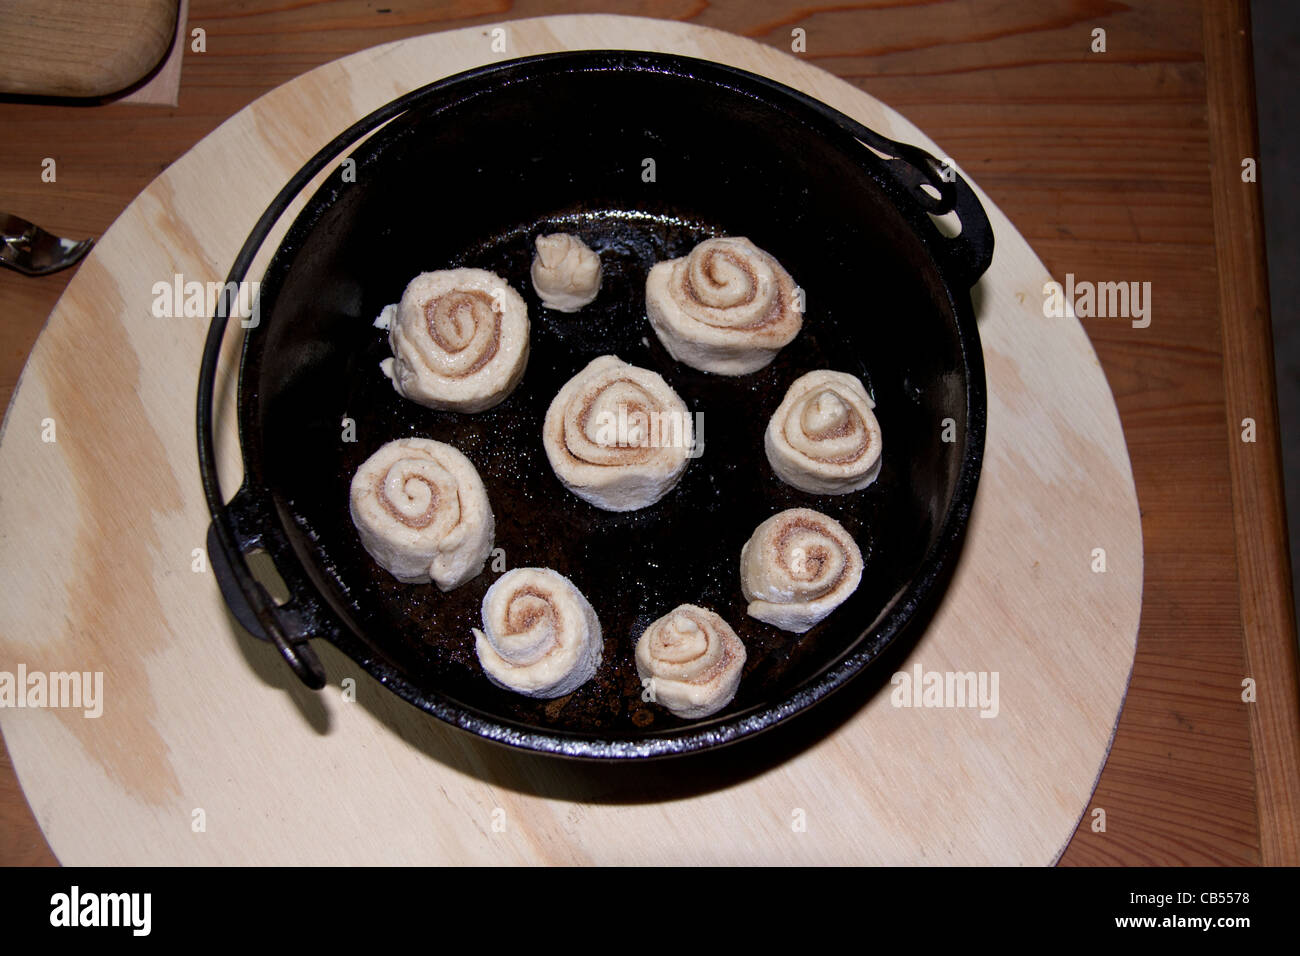 Cinnamon rolls ready to be cooked in cast iron 'black iron' Dutch Oven pot using hot coals. Stock Photo